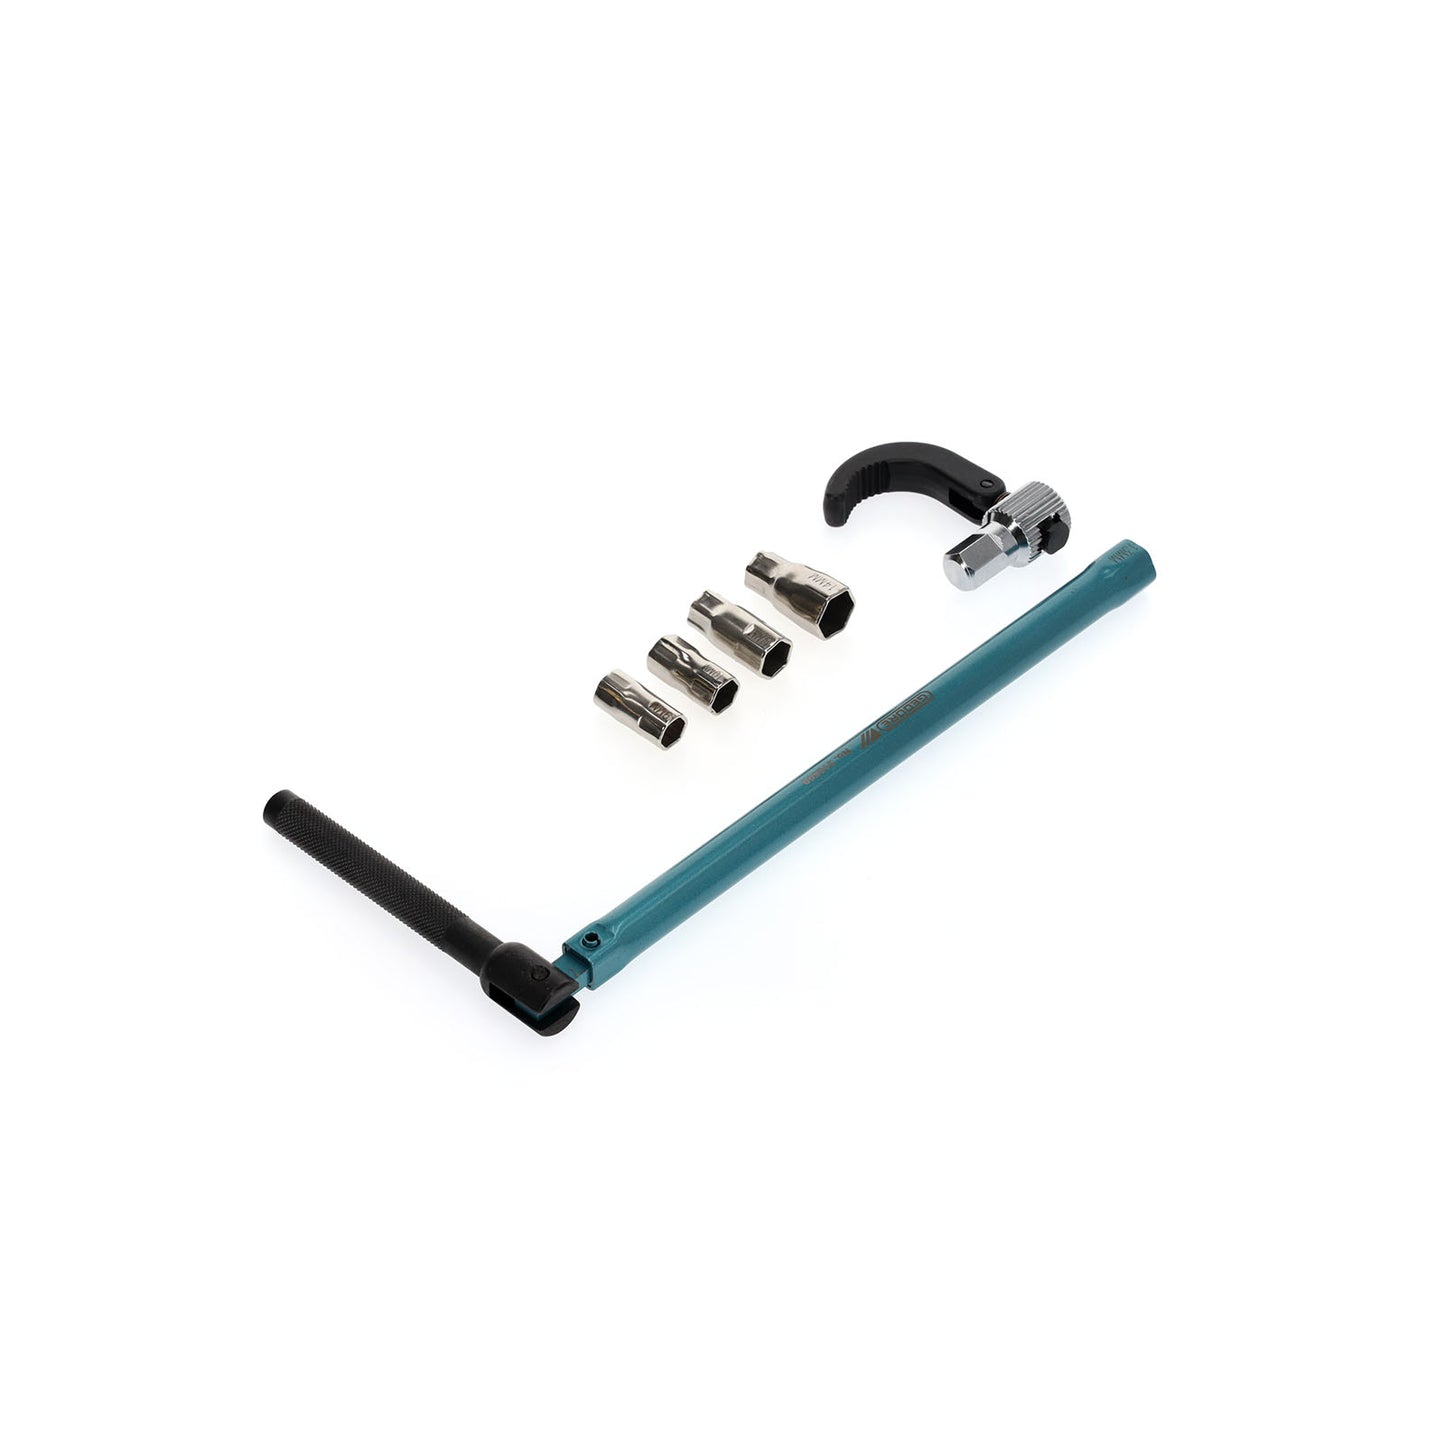 GEDORE 316500 - Sink nut wrench (2829274)